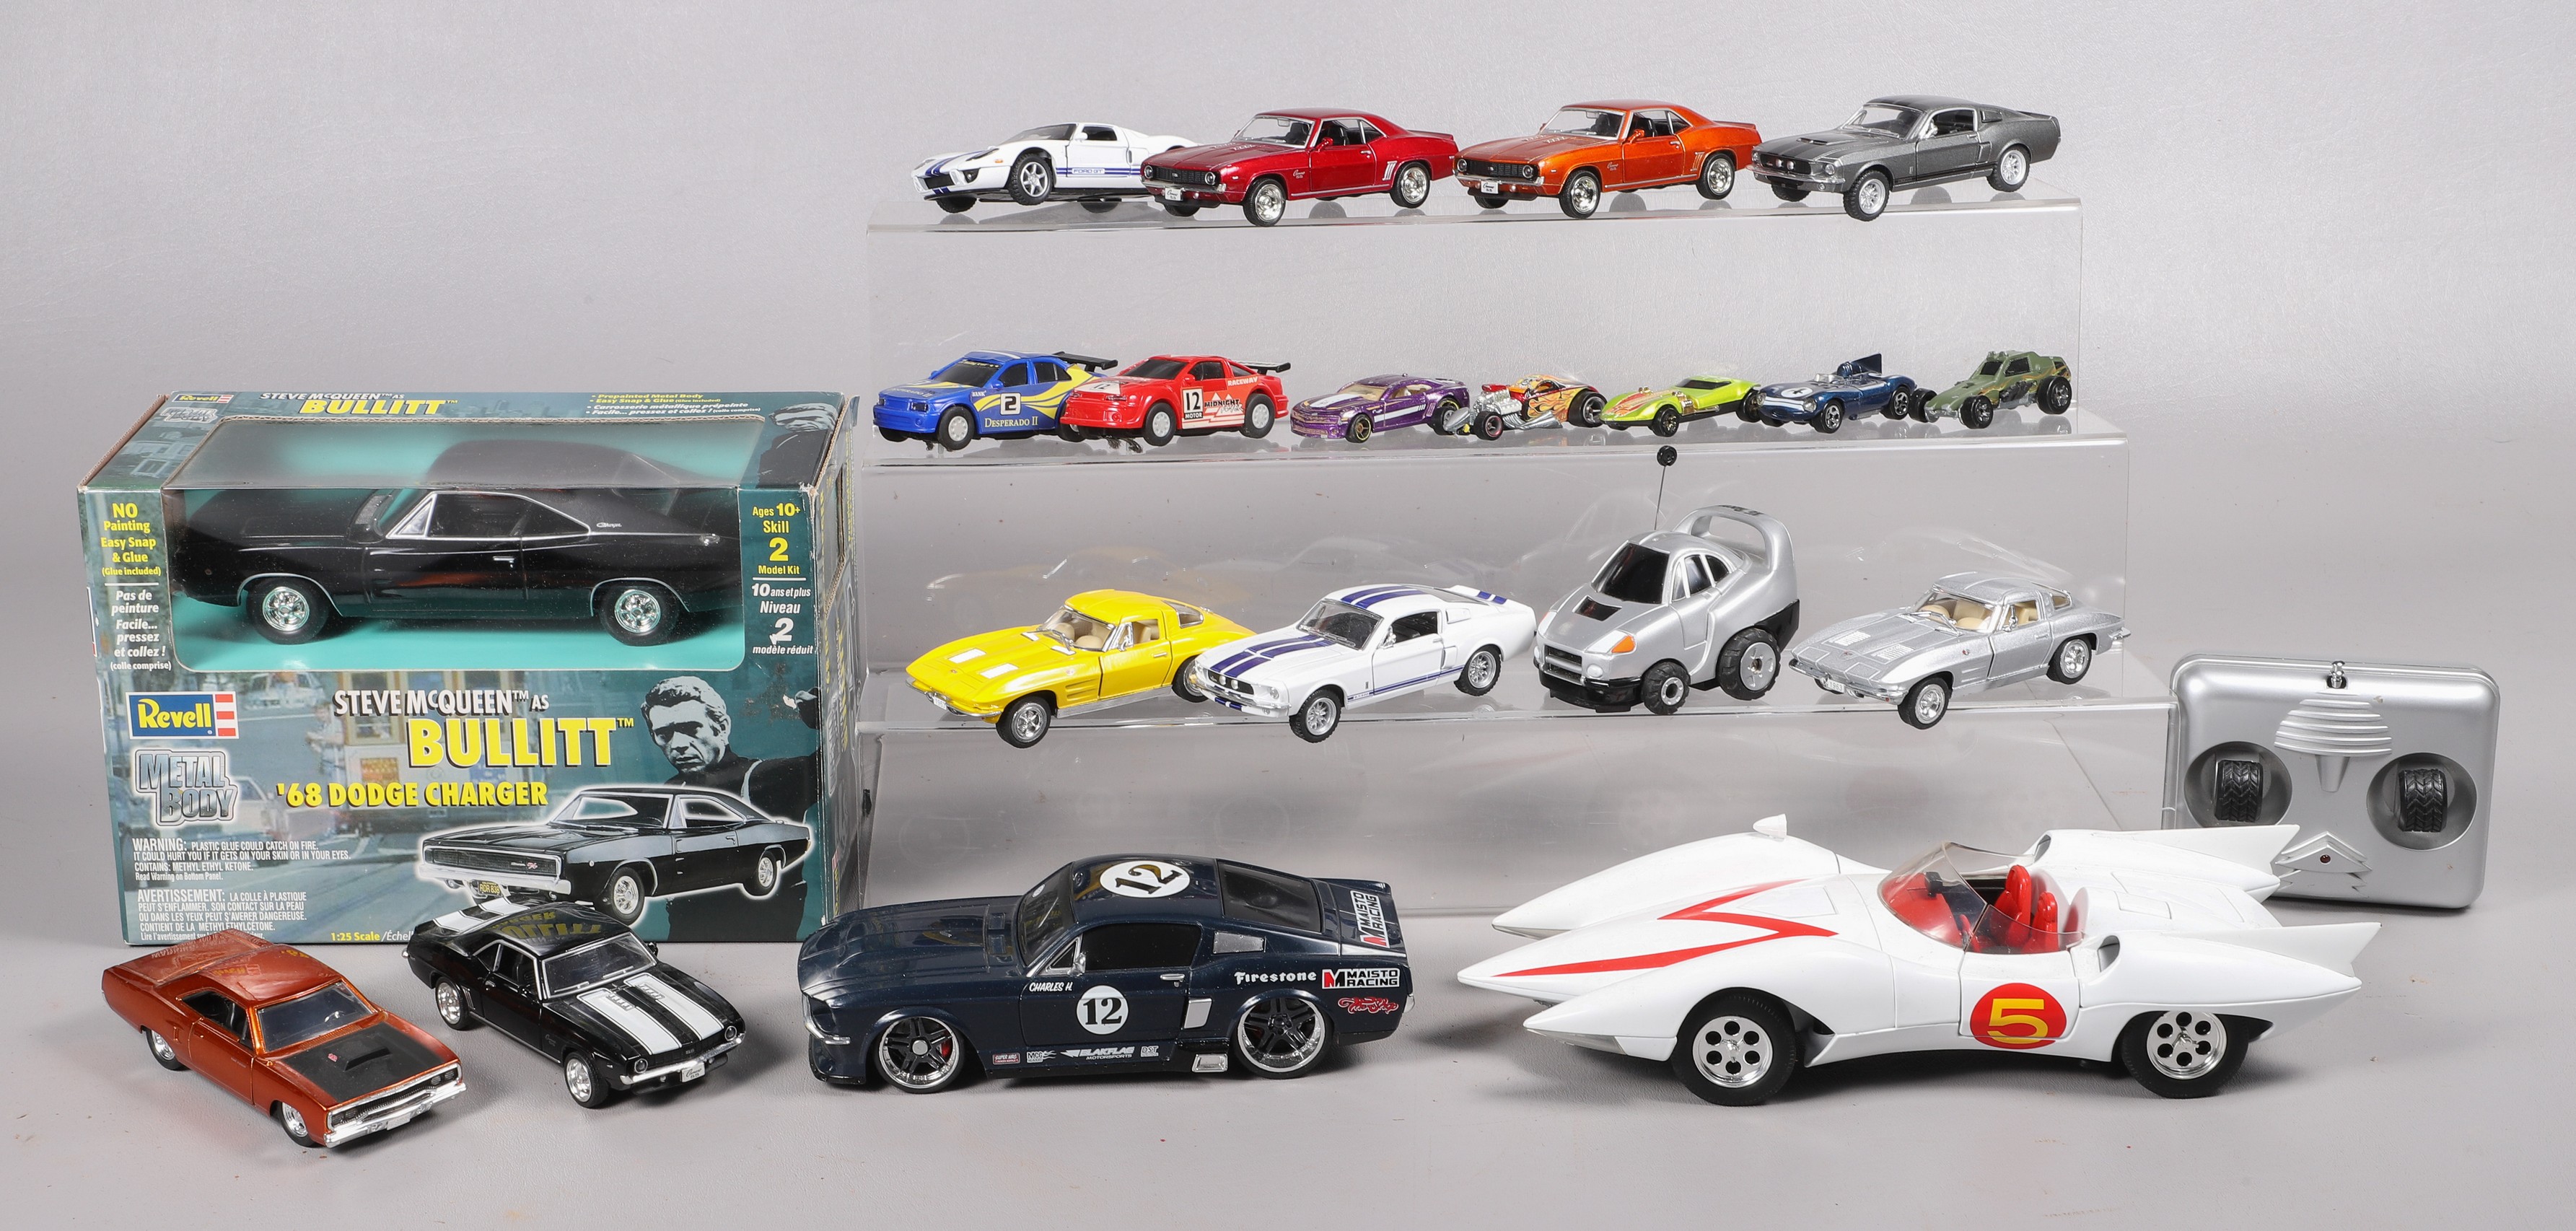 Lot of toy cars, including Revell